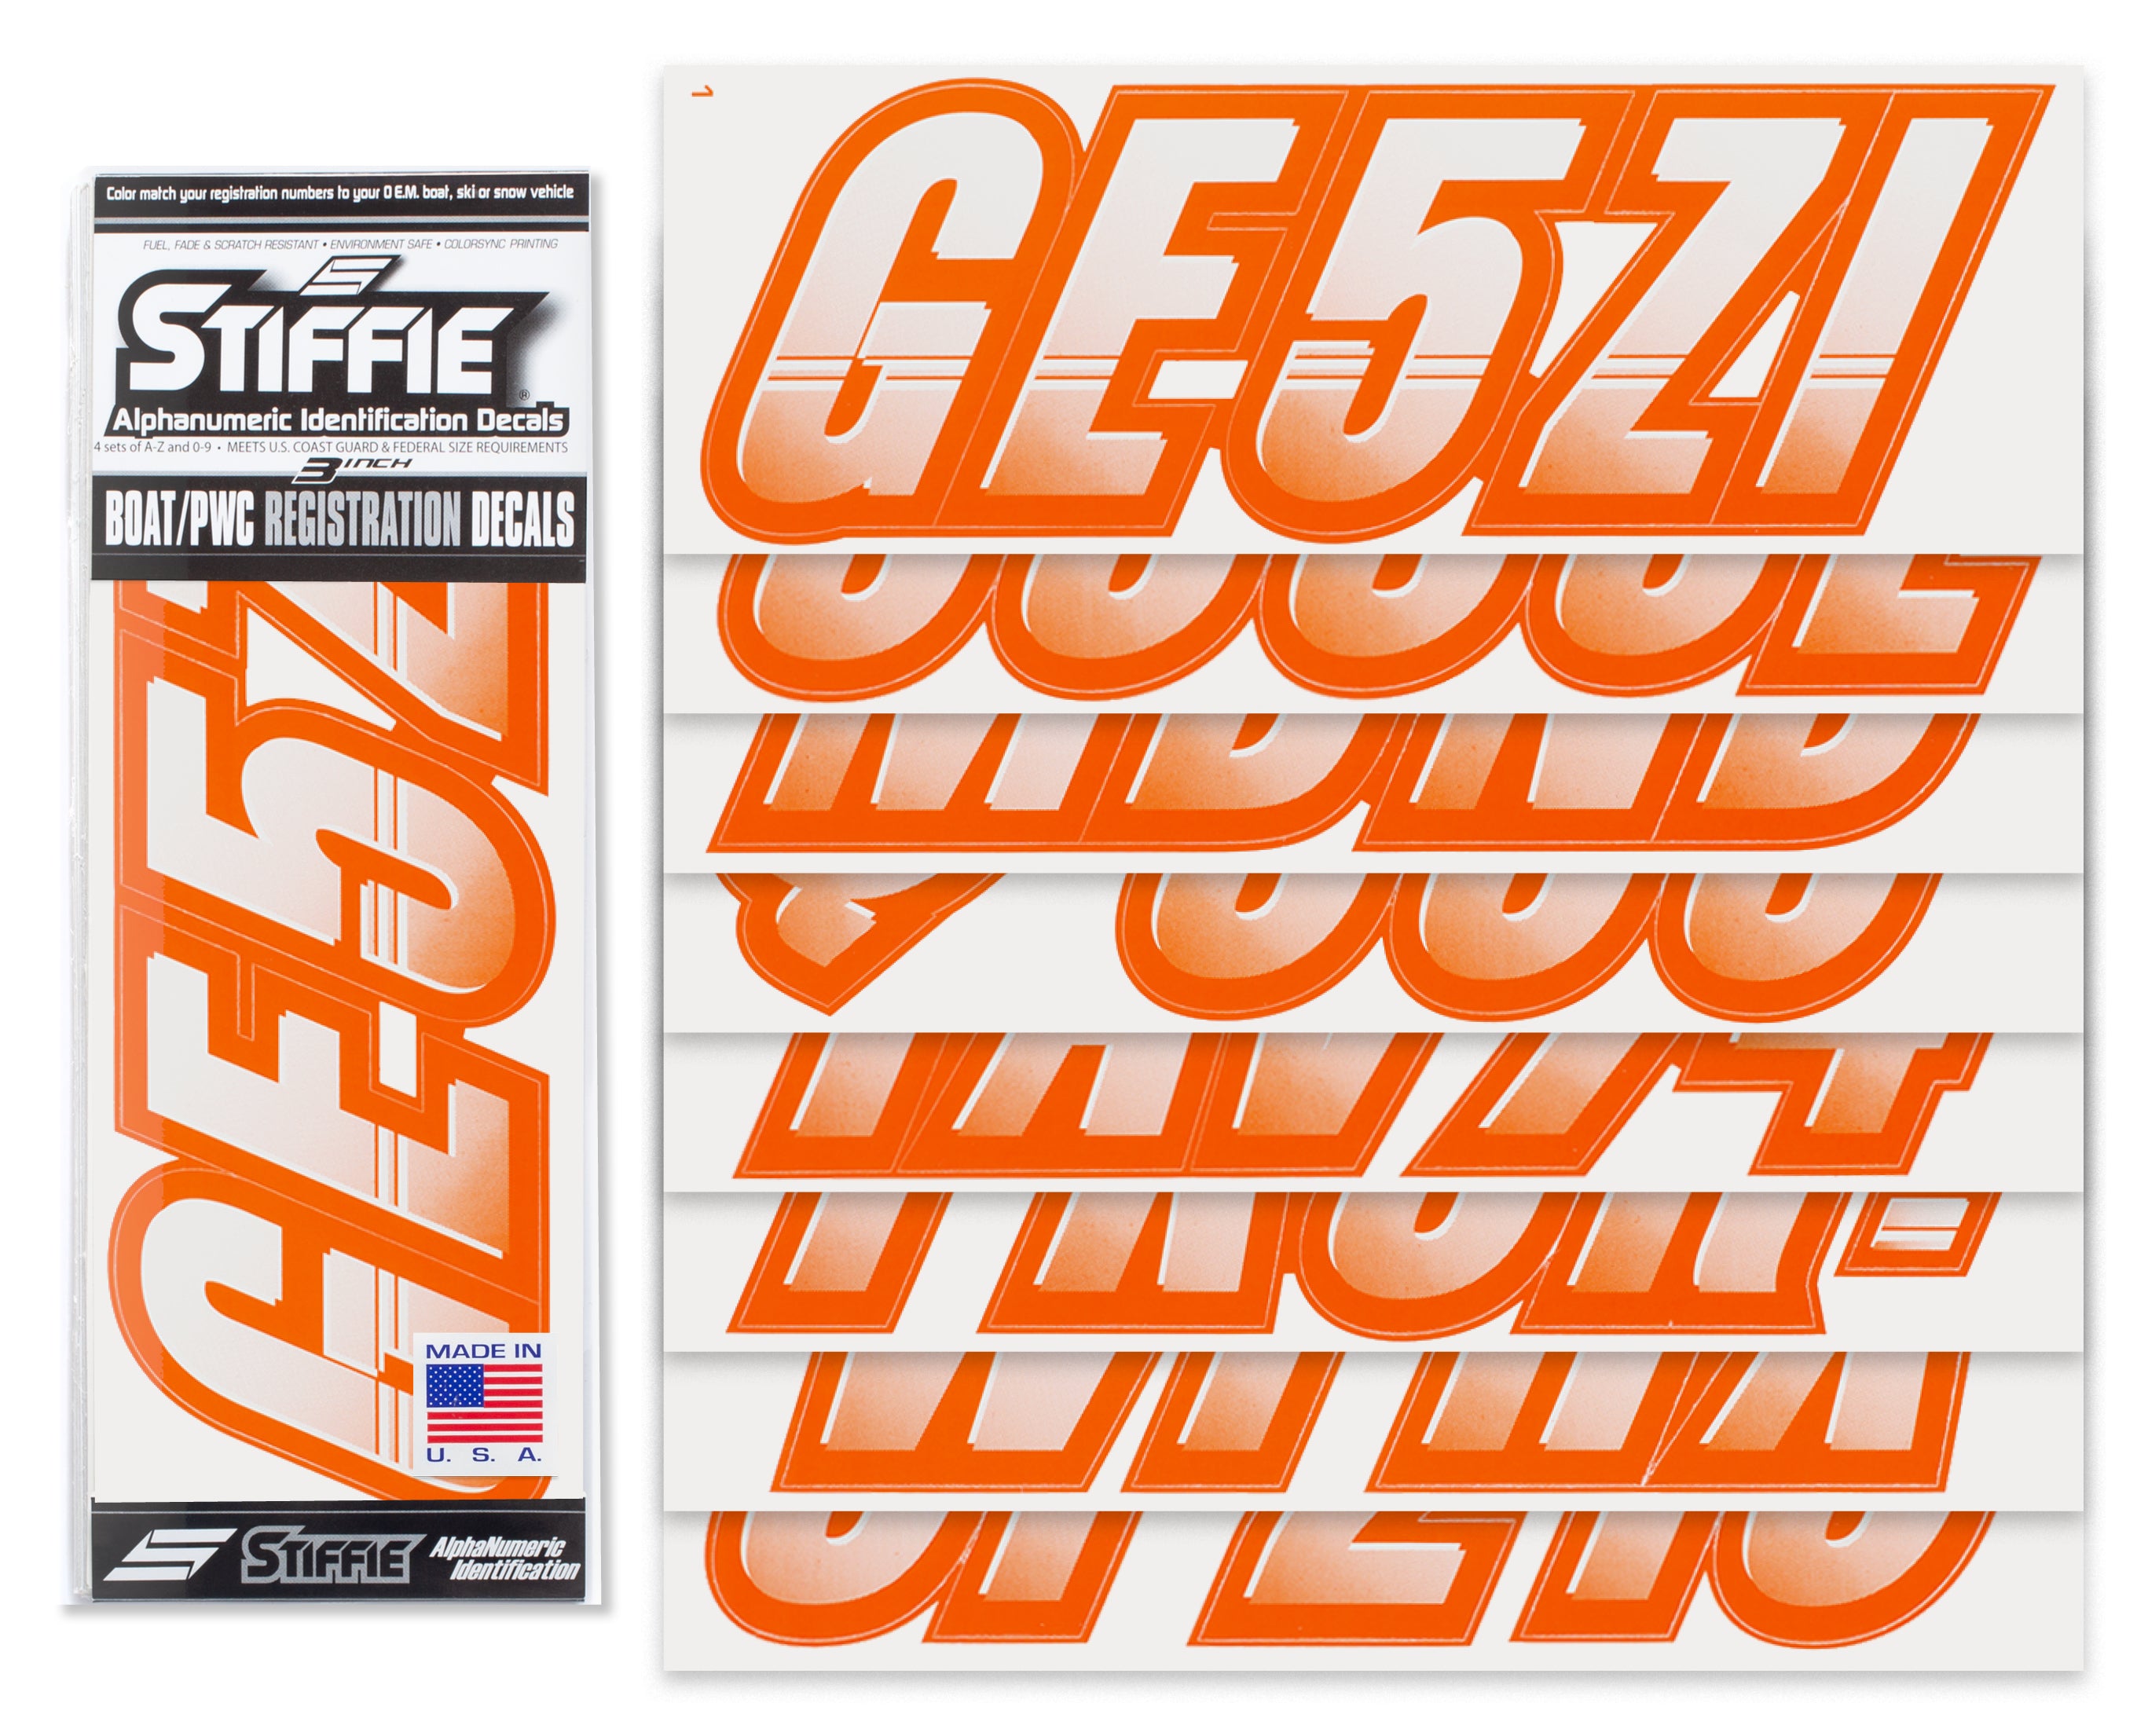 Stiffie Techtron White/Orange 3" Alpha-Numeric Registration Identification Numbers Stickers Decals for Boats & Personal Watercraft